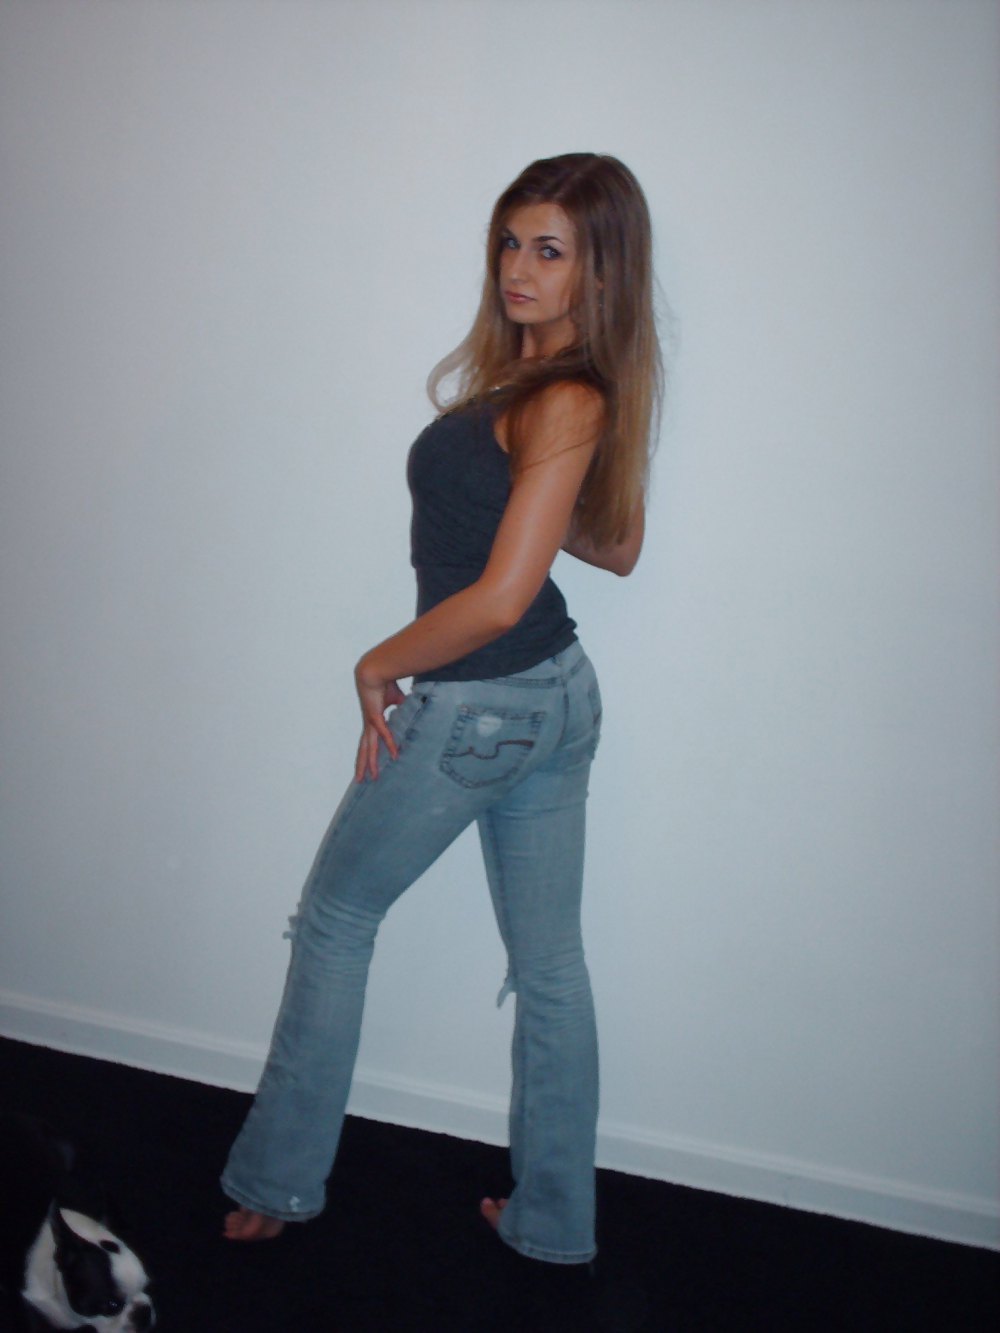 Amanda in Ripped Jeans & Barefeet # 2 #9409820